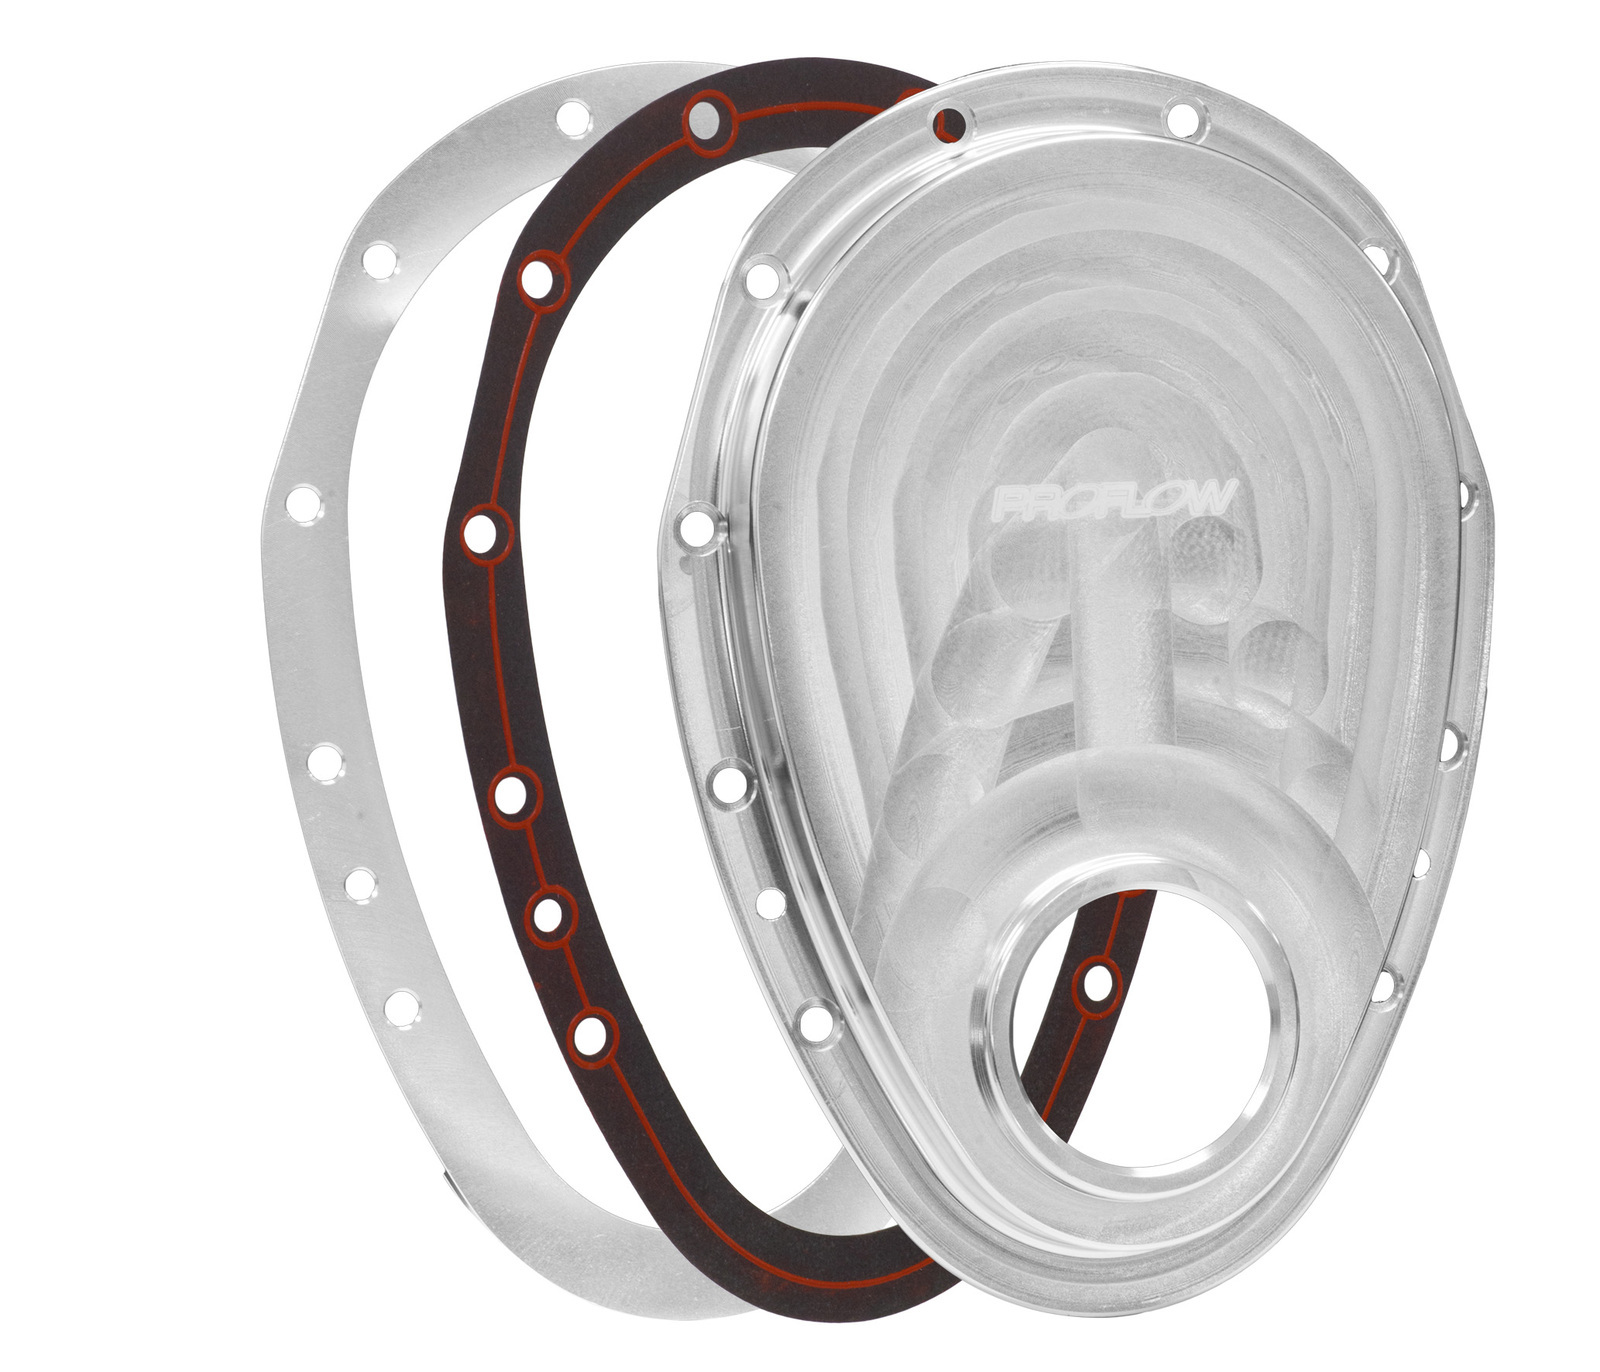 Proflow Timing Cover, 2-piece, Billet Aluminium, Silver Anodised, SB For Chevrolet V8 Small Block, Kit,